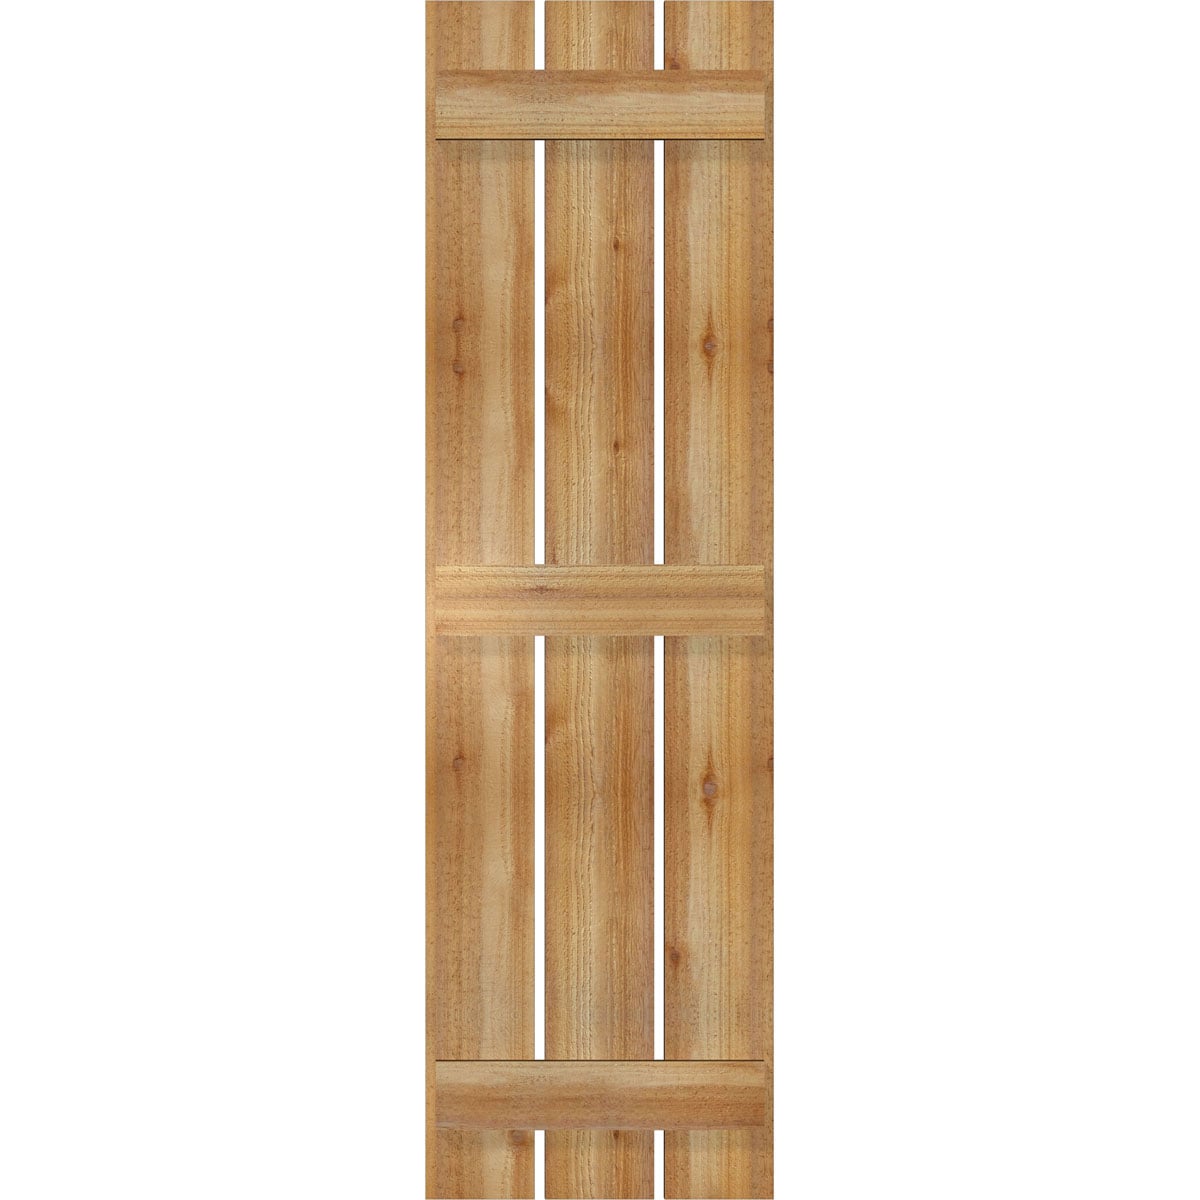 Ekena Millwork 2-Pack 17.125-in W x 59-in H Unfinished Board and Batten Spaced Wood Western Red cedar Exterior Shutters